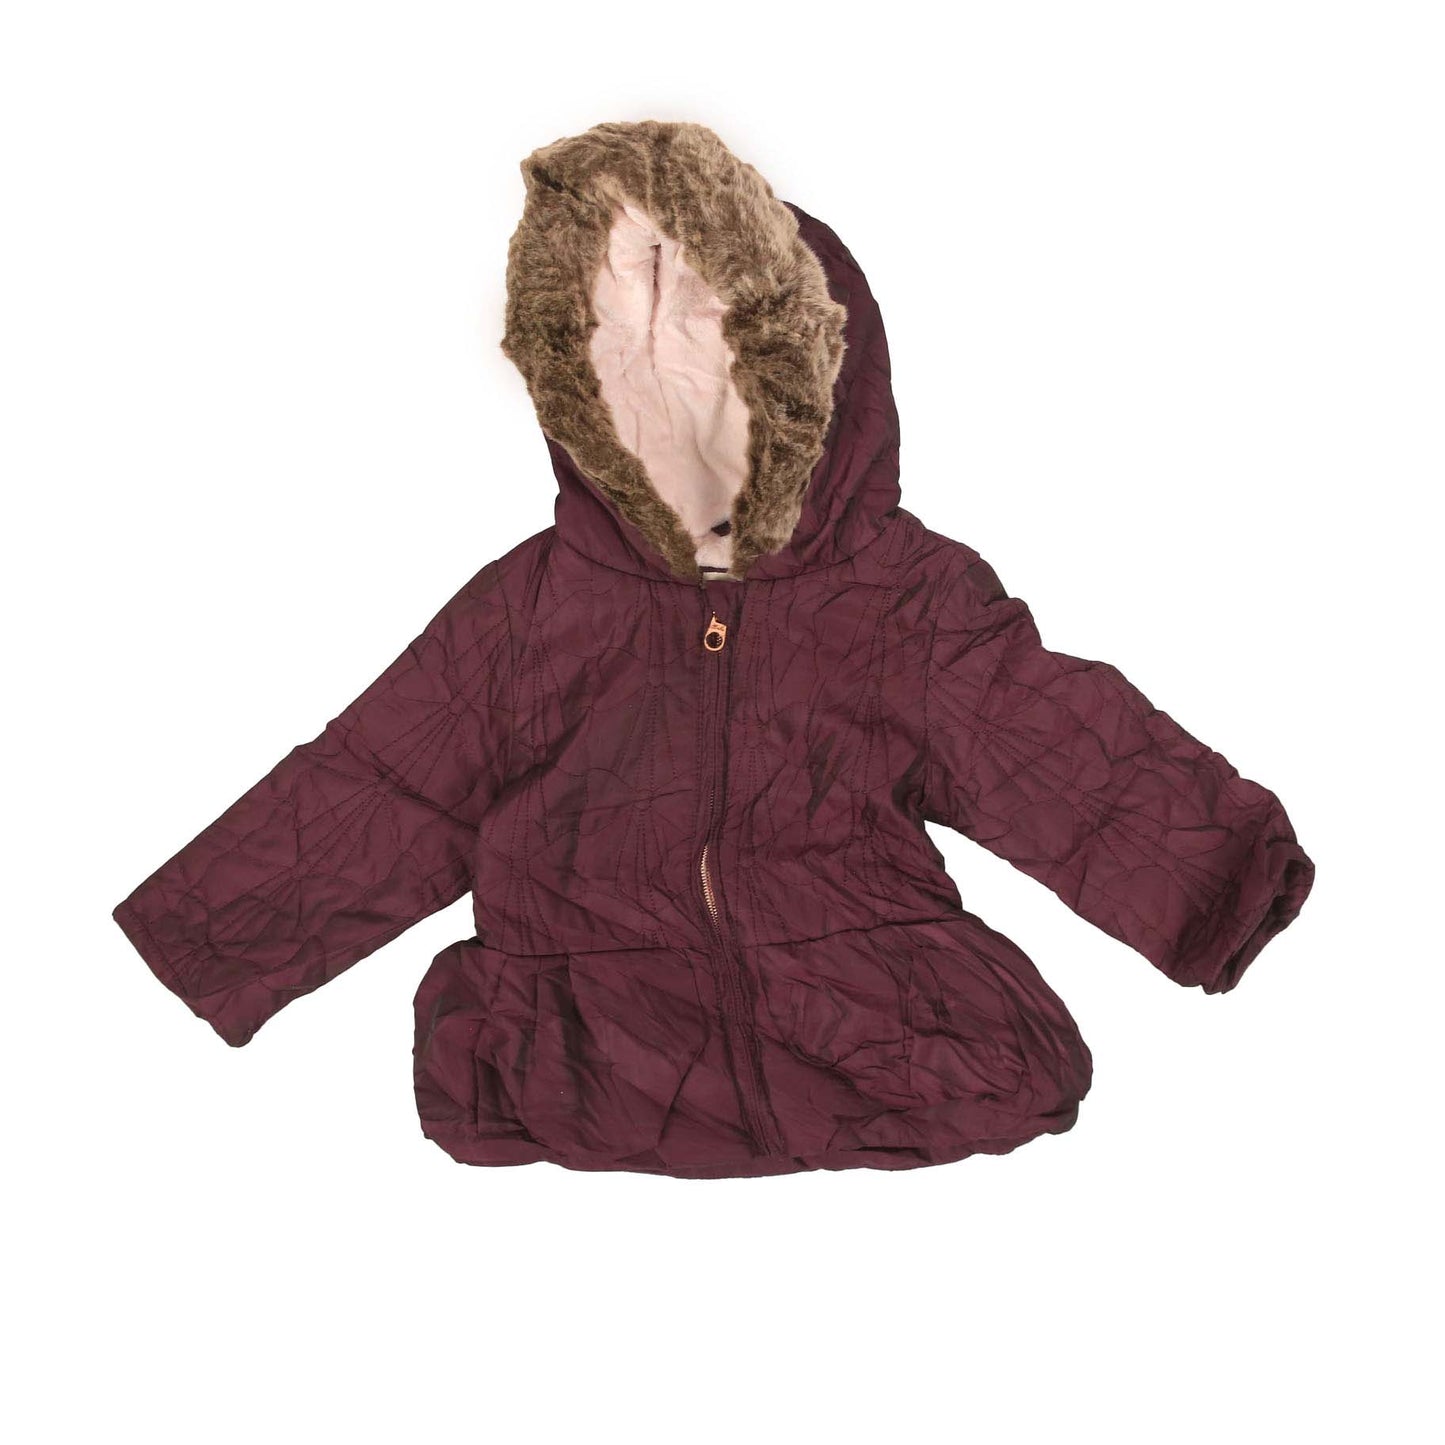 WITH LOVE FORM BAKER PLUSH PURPLE HOODED JACKET